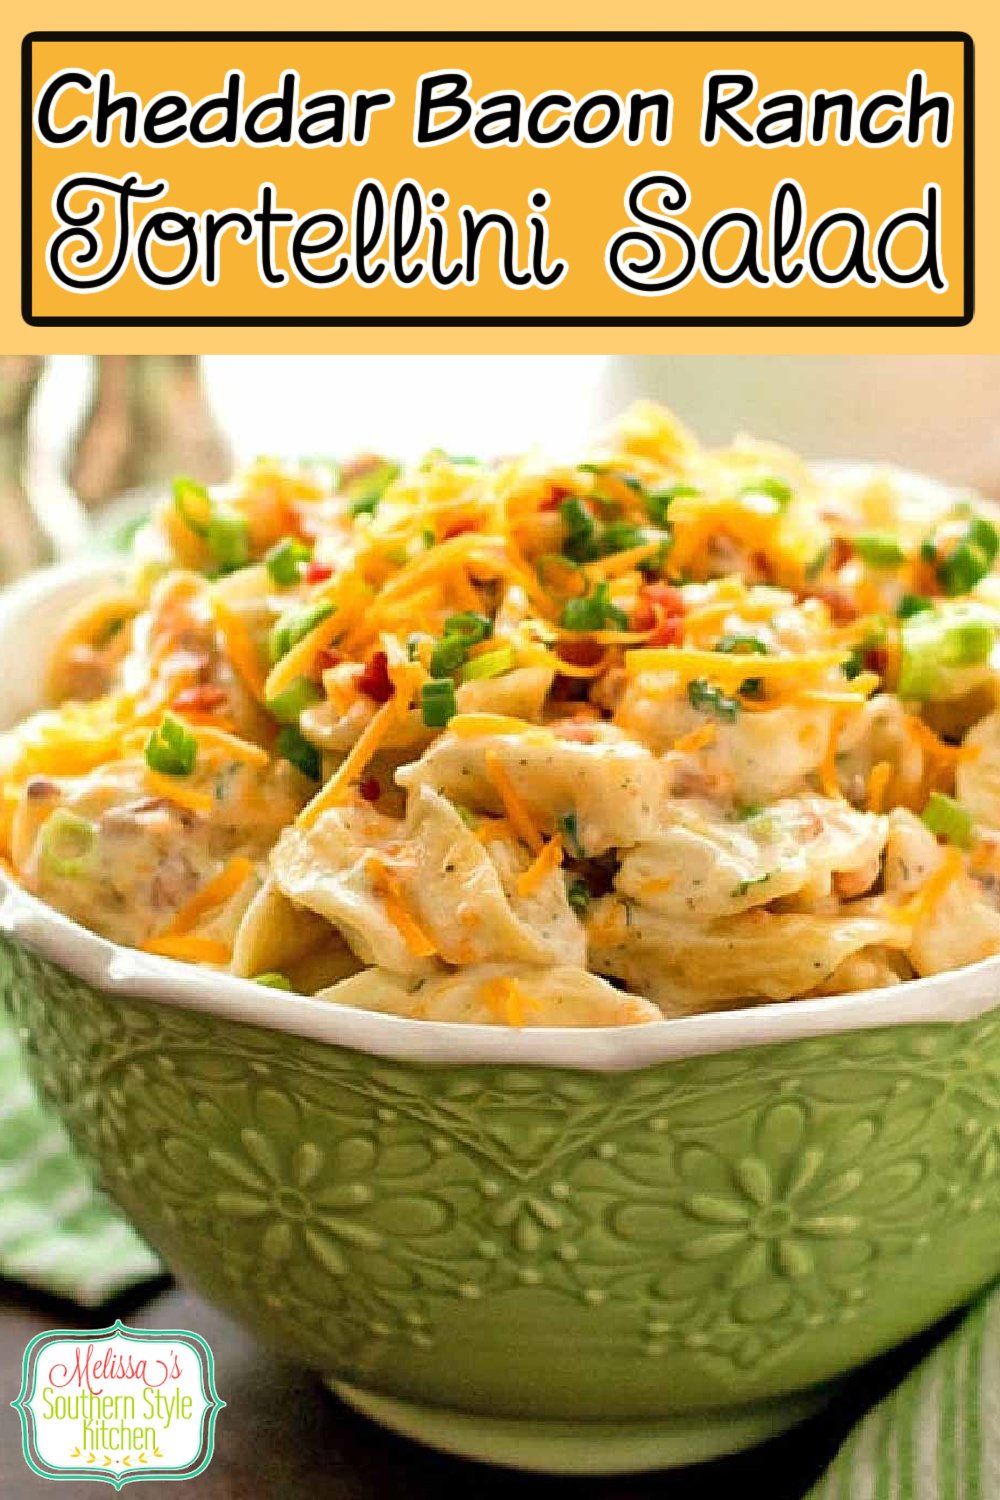 This Cheddar Bacon Ranch Tortellini Salad is a scrumptious side dish option! Add chicken and it's a complete meal #chickenbaconranch #tortellinisalad #cheesetortellini #chickenrecipes #easydinnerideas #southernfood #pasta #southernrecipes